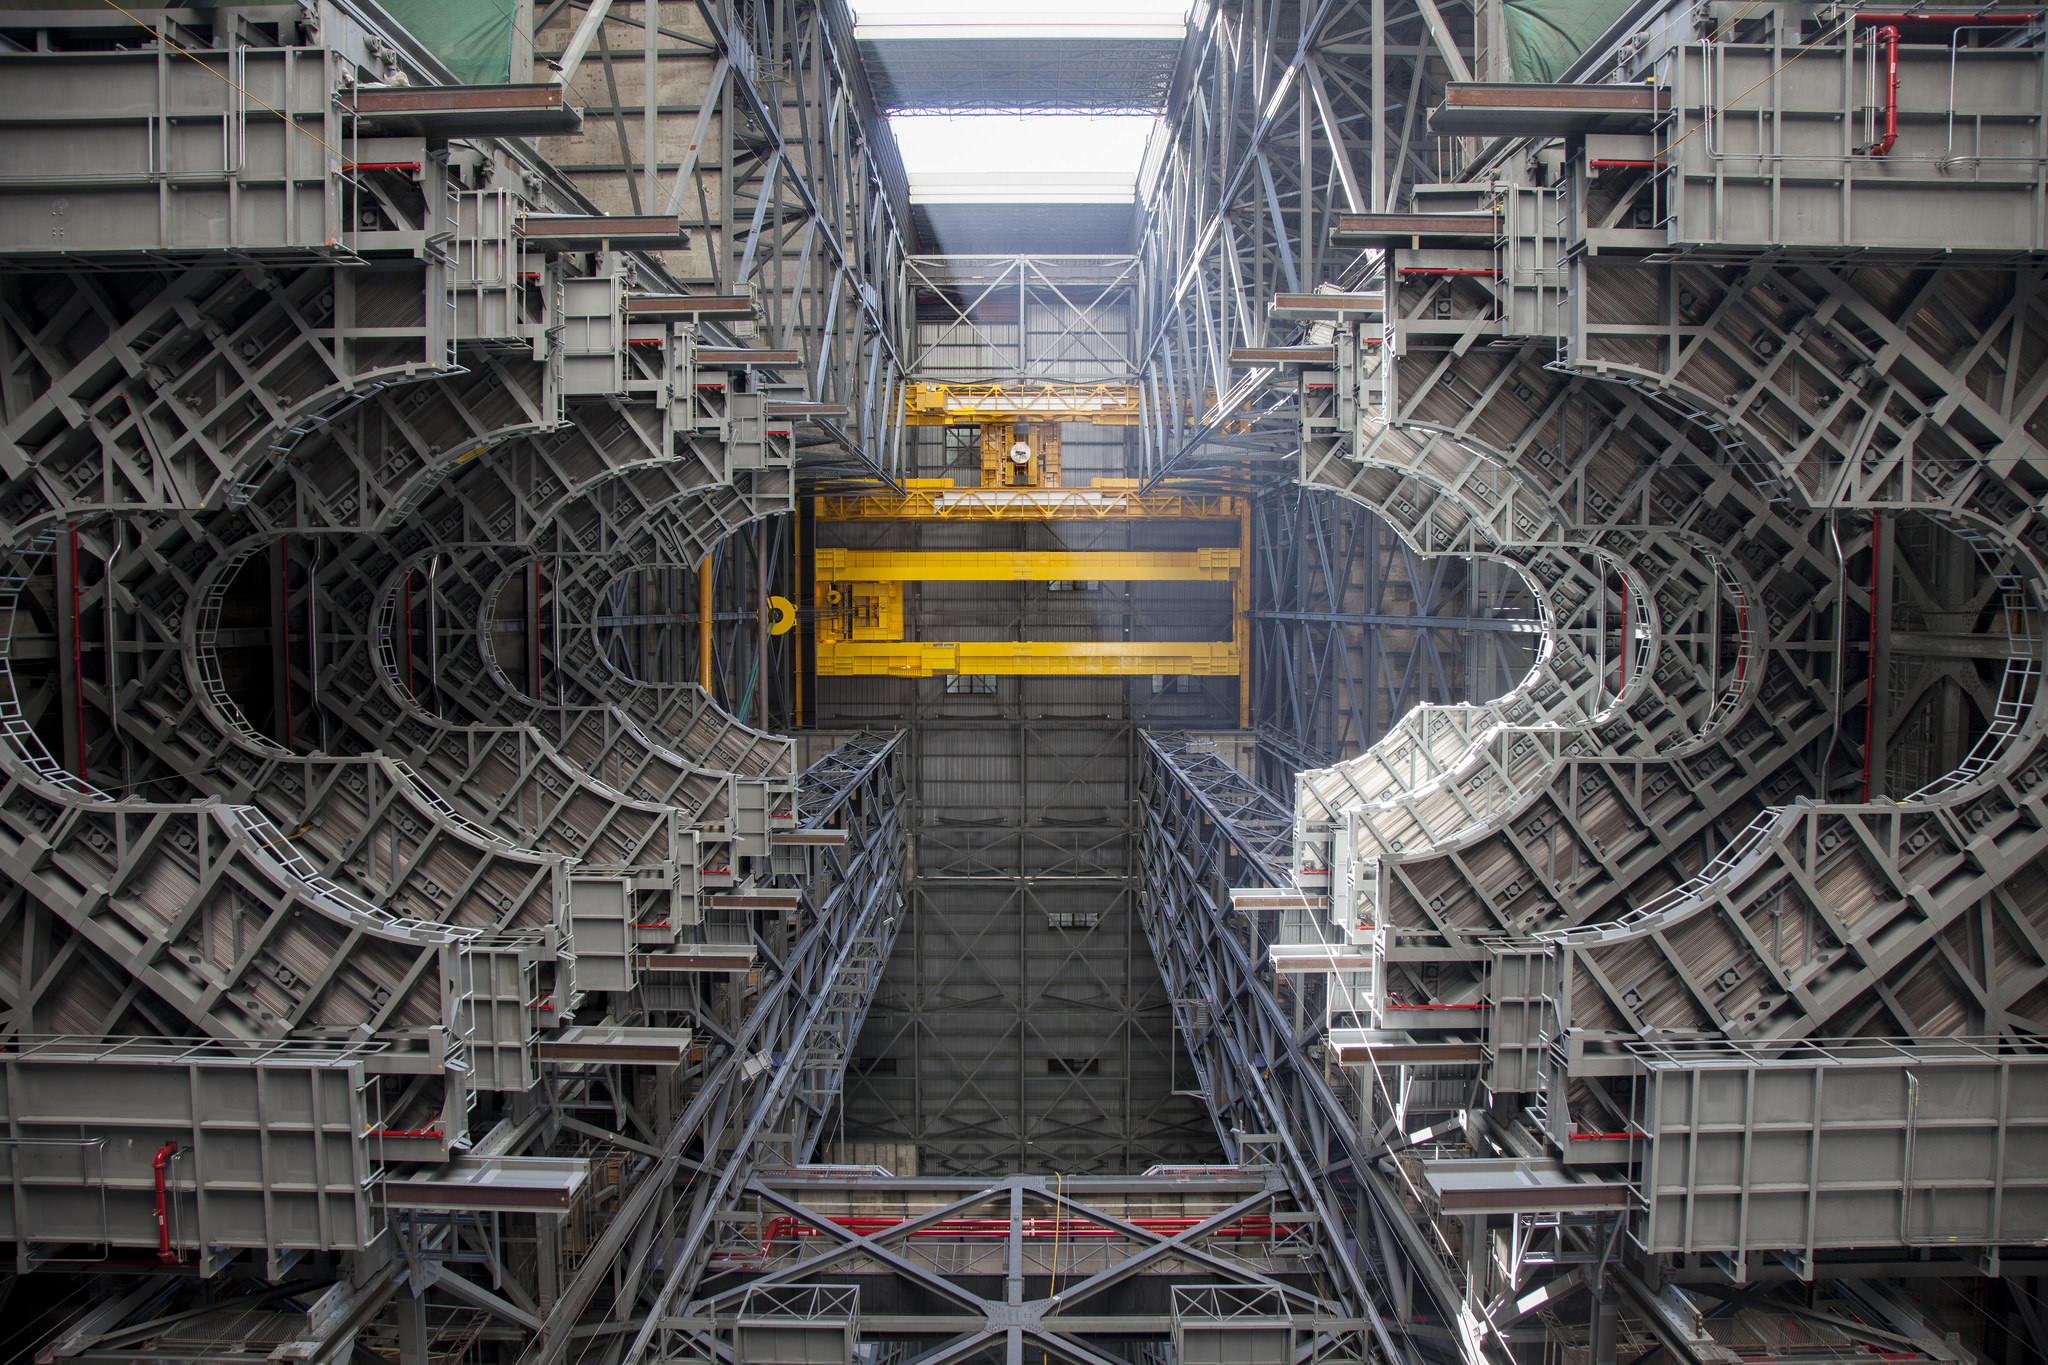 A heavy-lift crane lifts the first half of the F-level work platforms, F south, for NASA’s Space Launch System rocket, into position for installation July 15, in High Bay 3 of the Vehicle Assembly Building at NASA’s Kennedy Space Center in Florida. Photo credit: NASA/Bill White